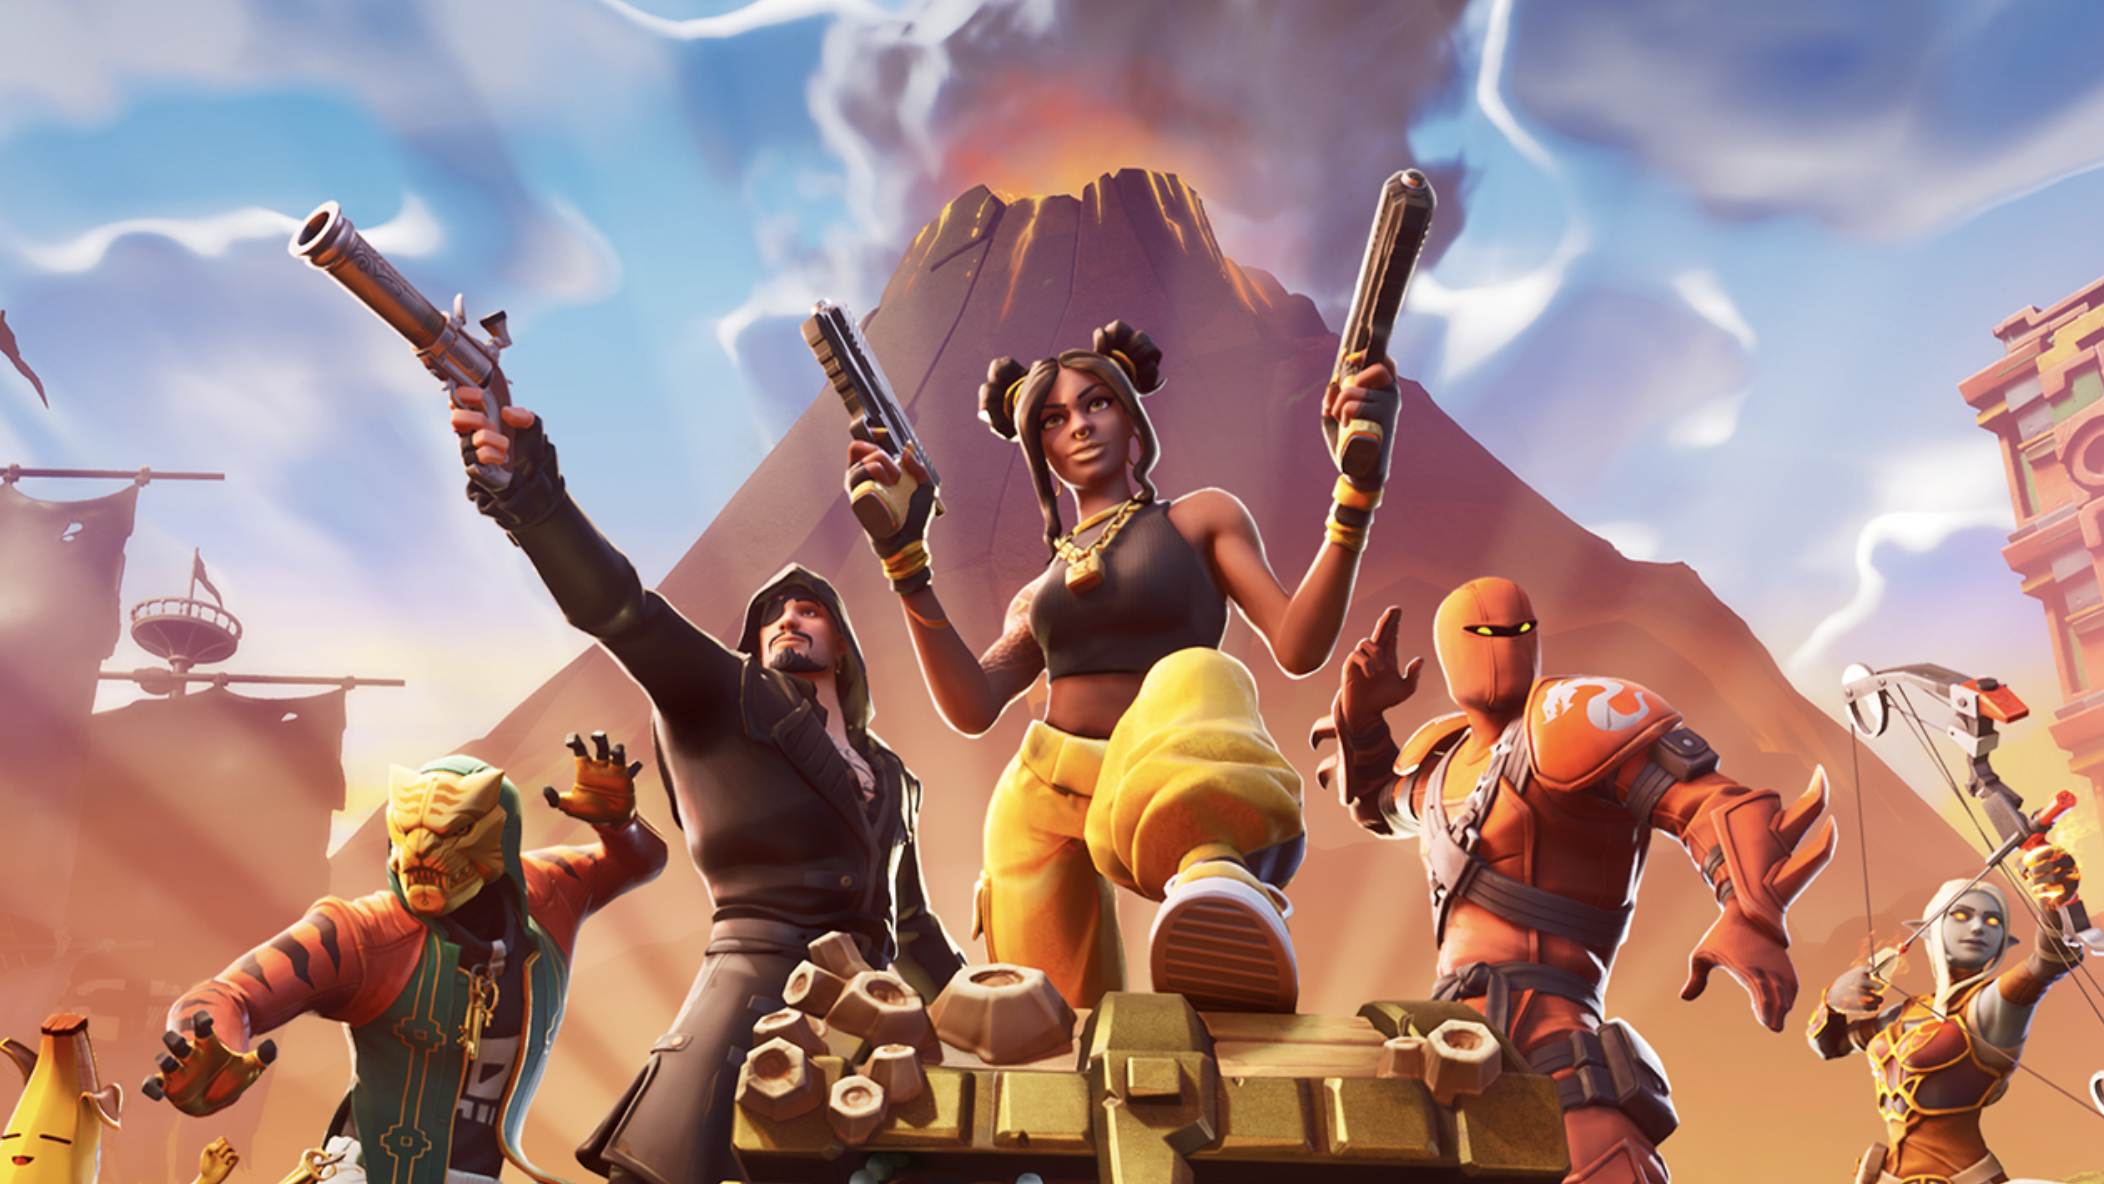 A scene from Fortnite is one of the world's biggest F2P games